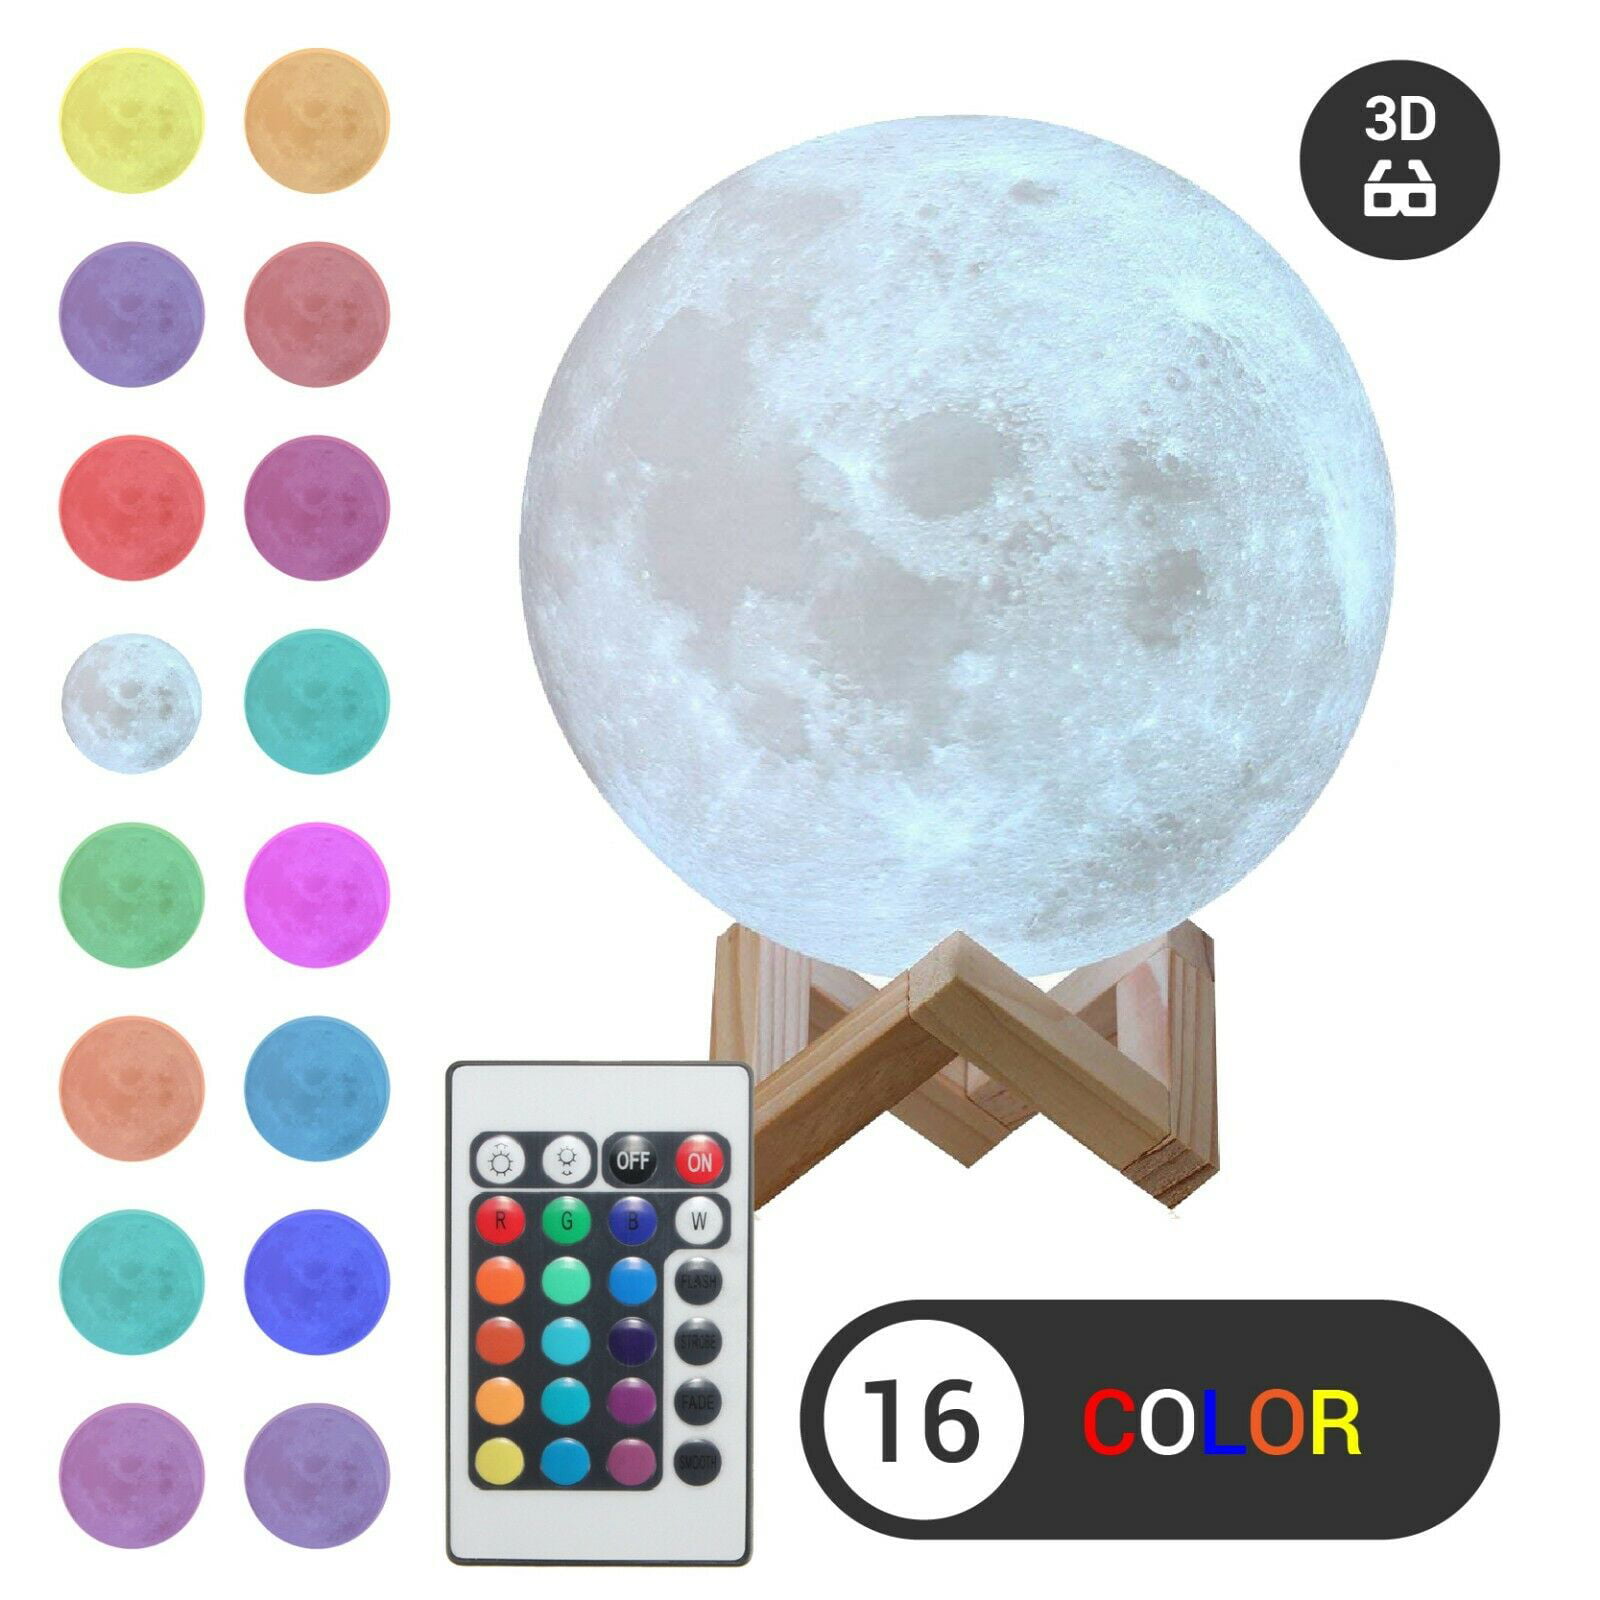 3D Moon Lamp LED Touch Night Light Desk Color Changing Night Lamp Remote Control 